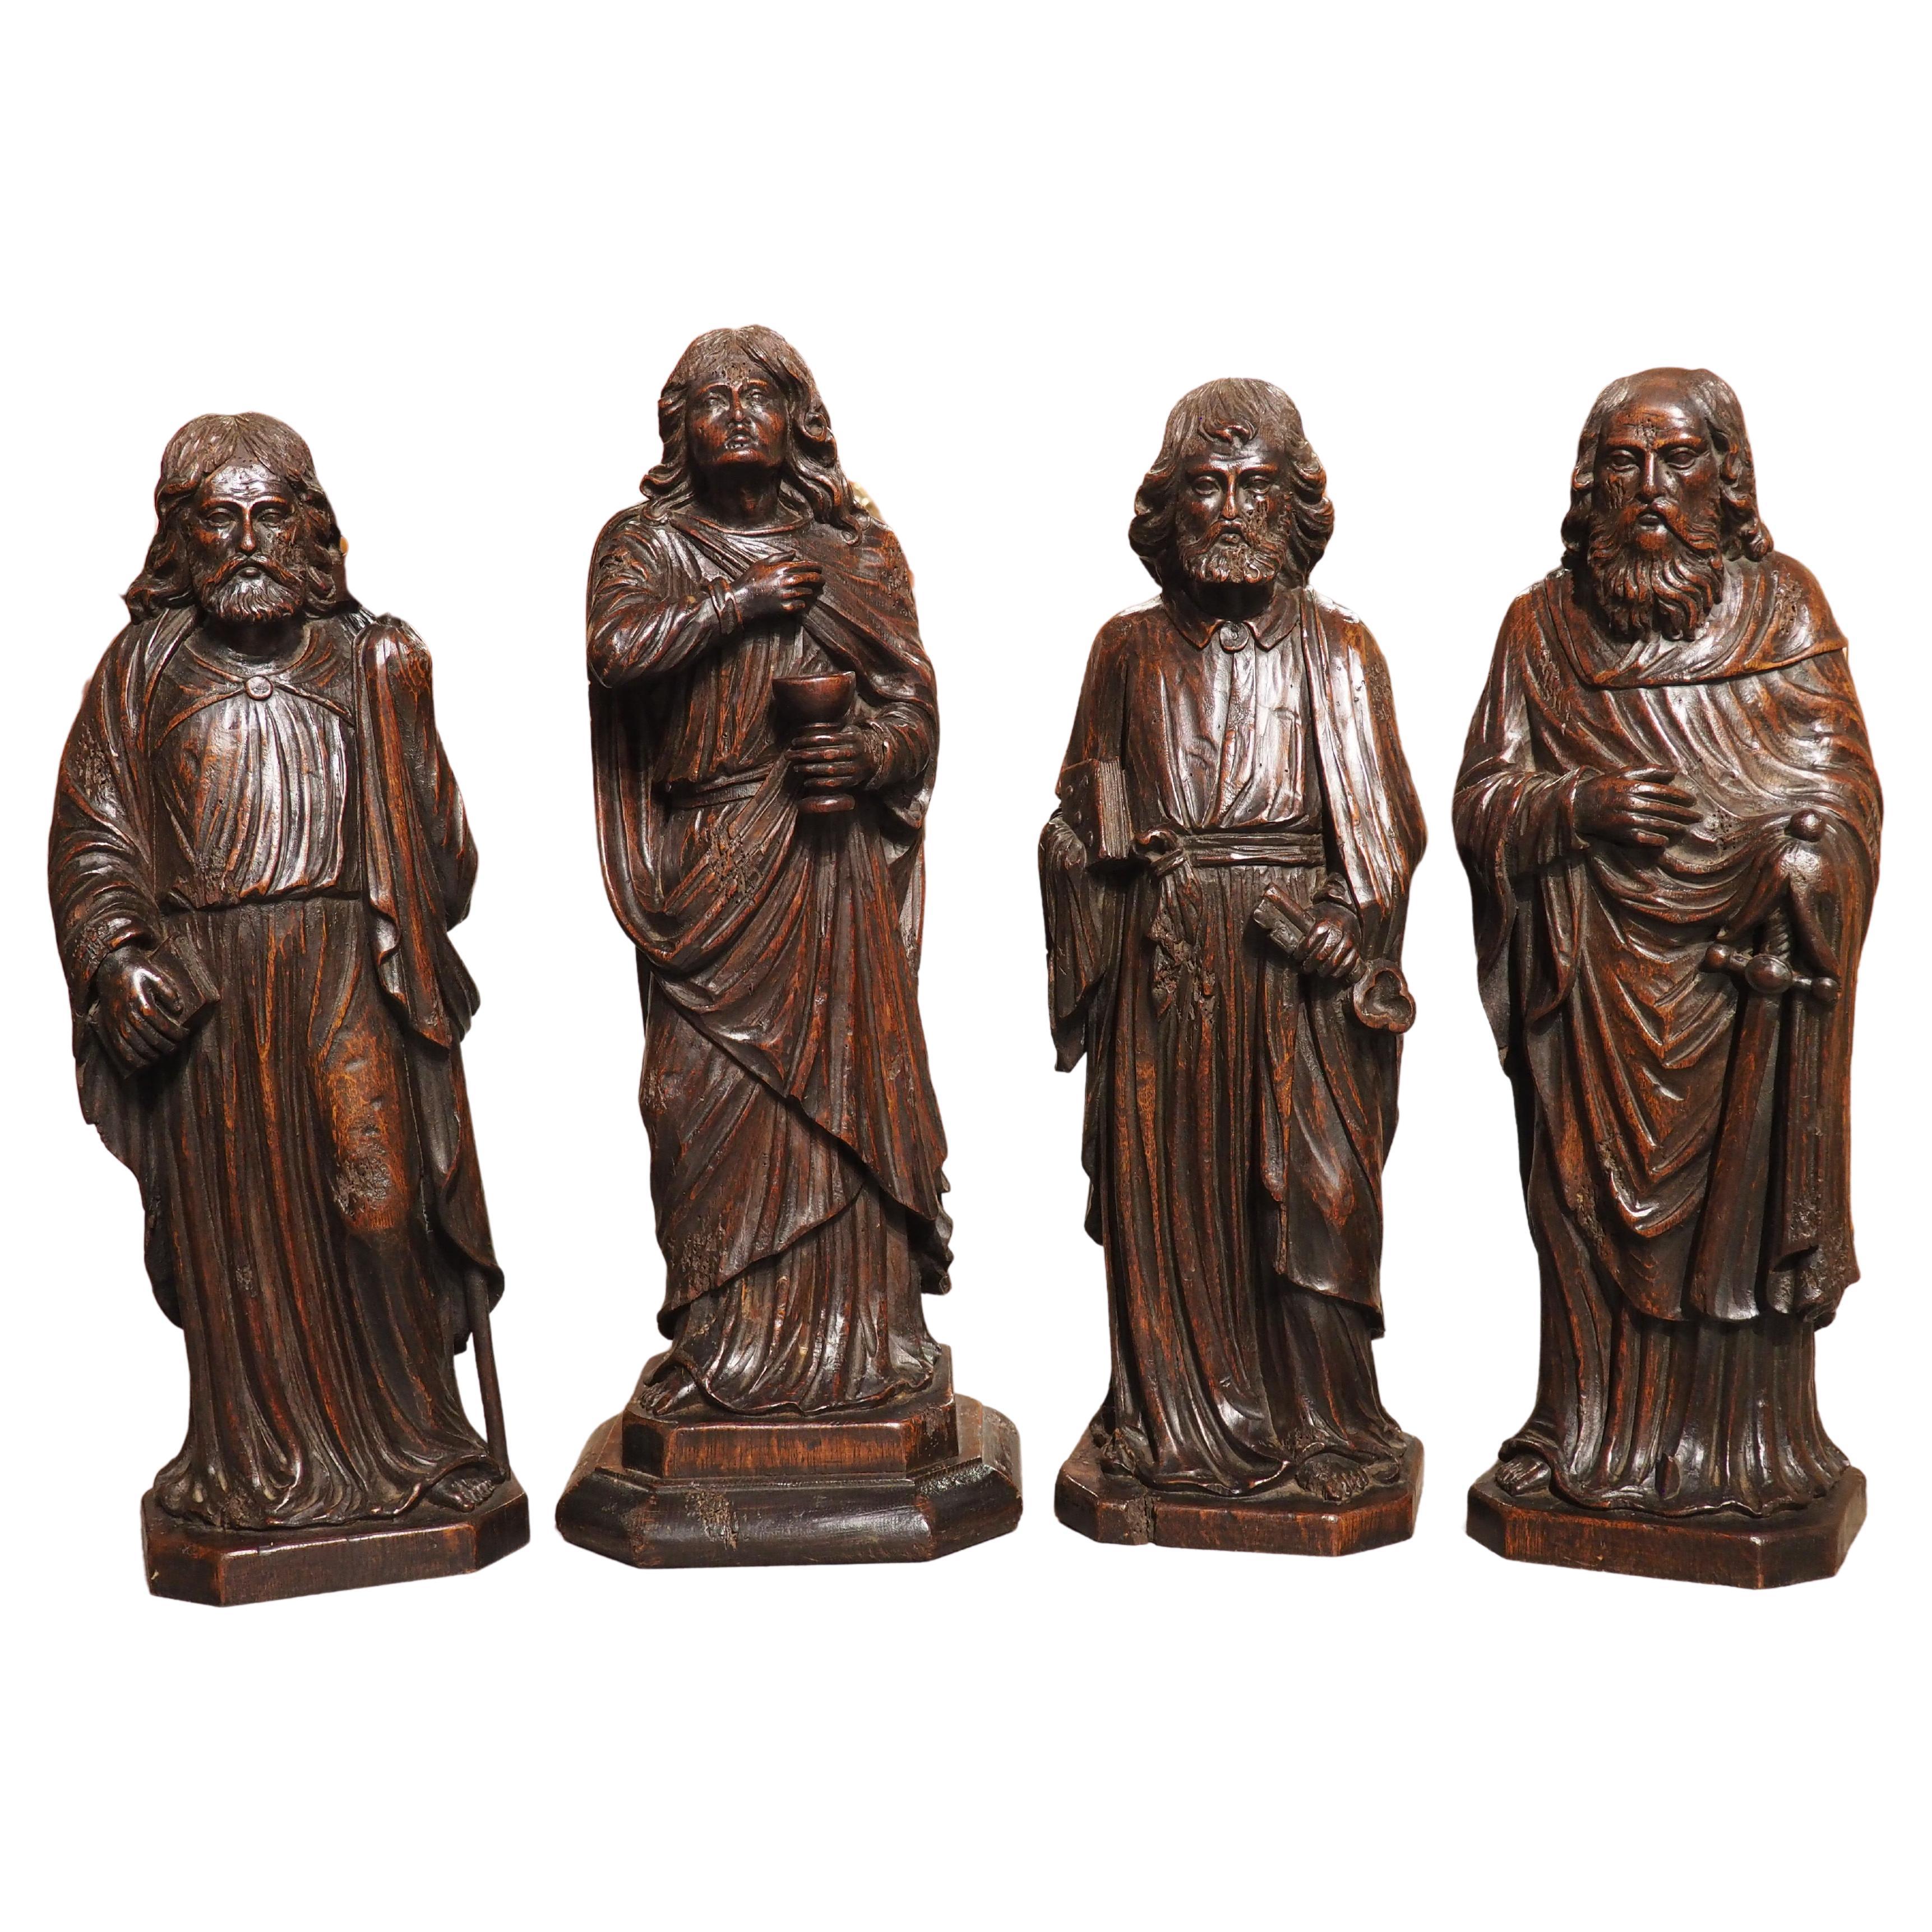 Circa 1800 Carved Oak Sculptures of the Apostles, James, John, Peter, and Paul For Sale